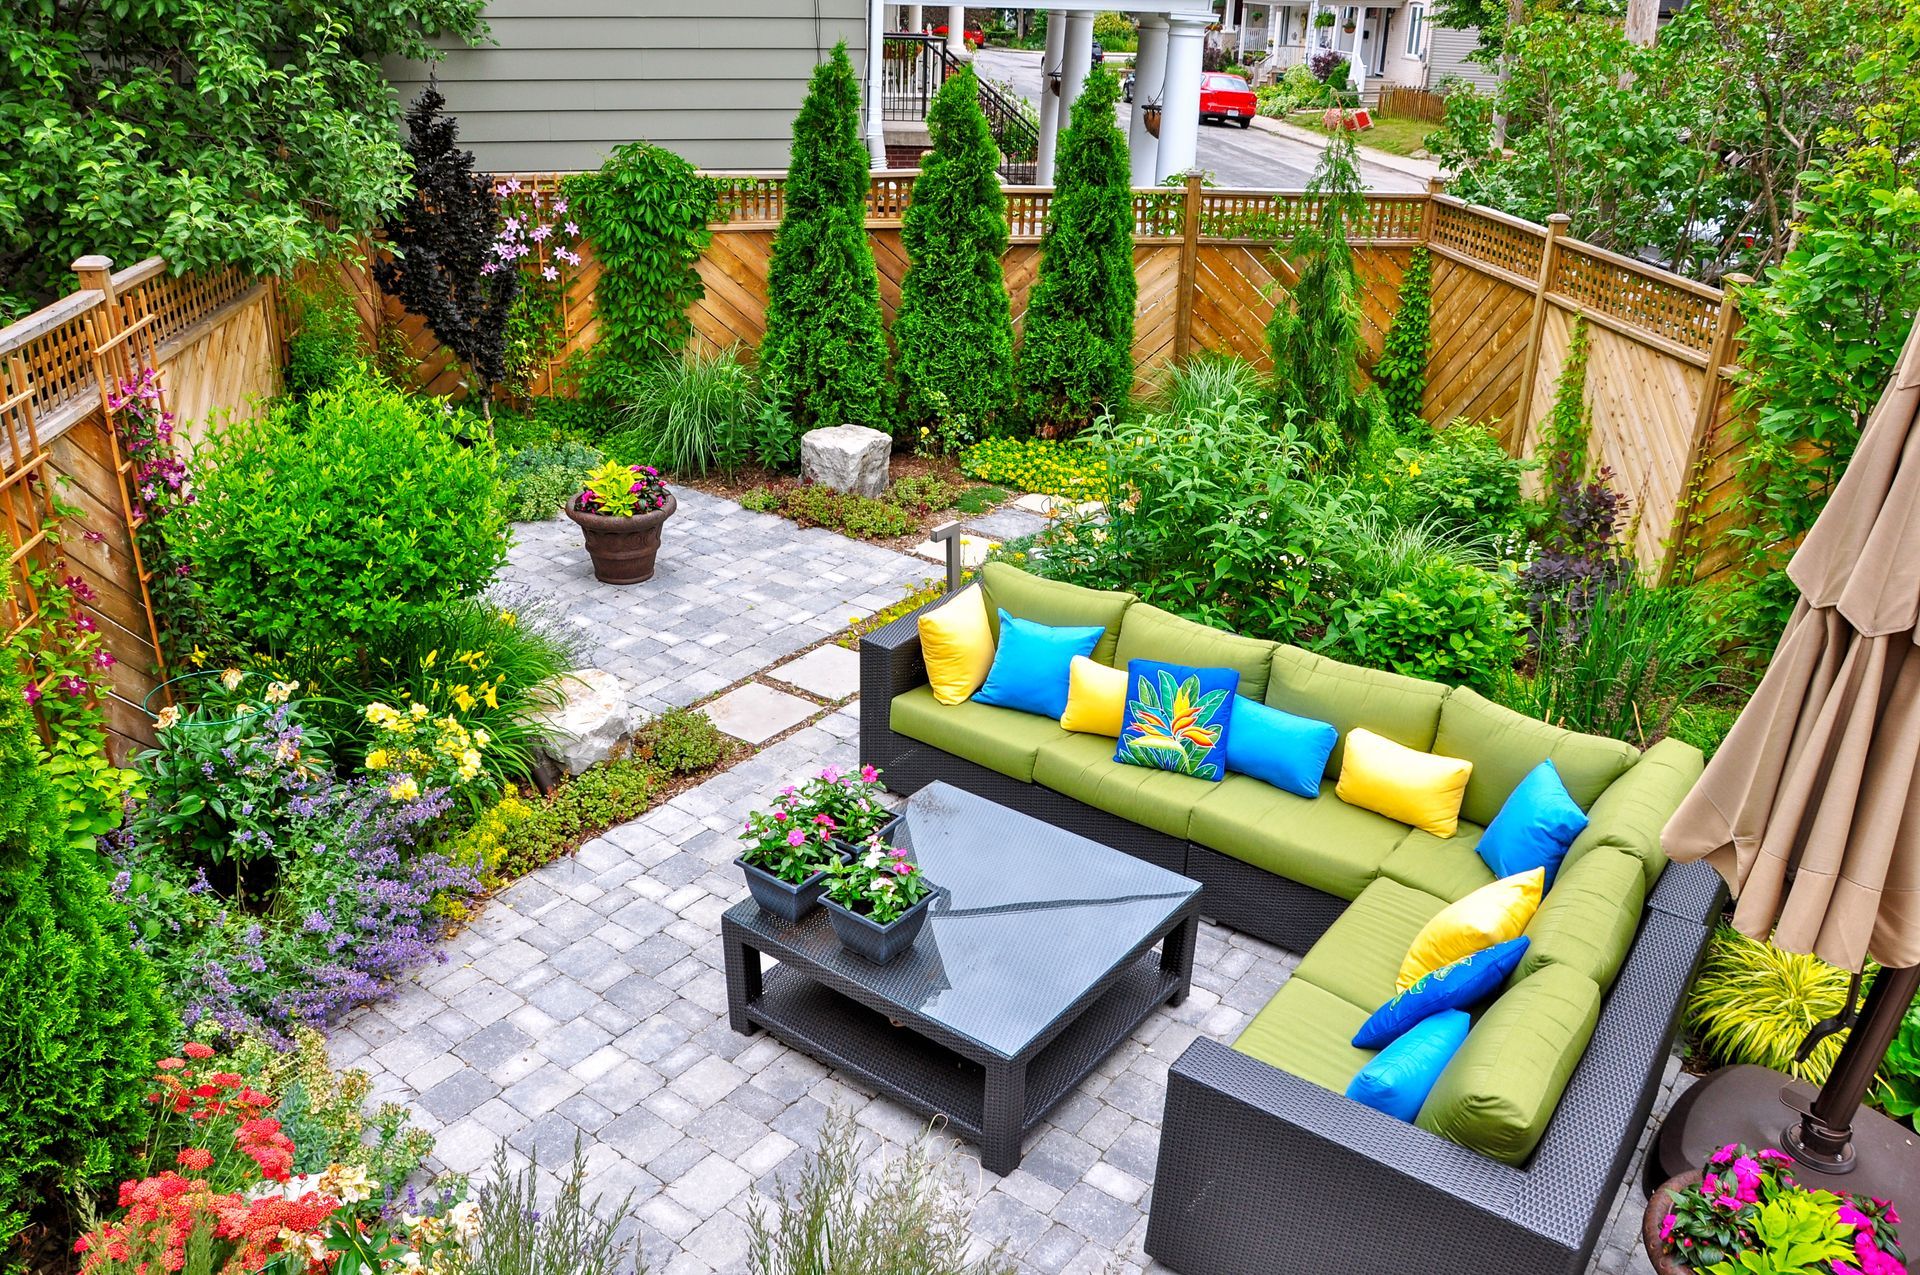 urban backyard garden featuring a tumbled paver patio, flagstone stepping stones, and a variety of trees, shrubs and perennials add colour and year round interest